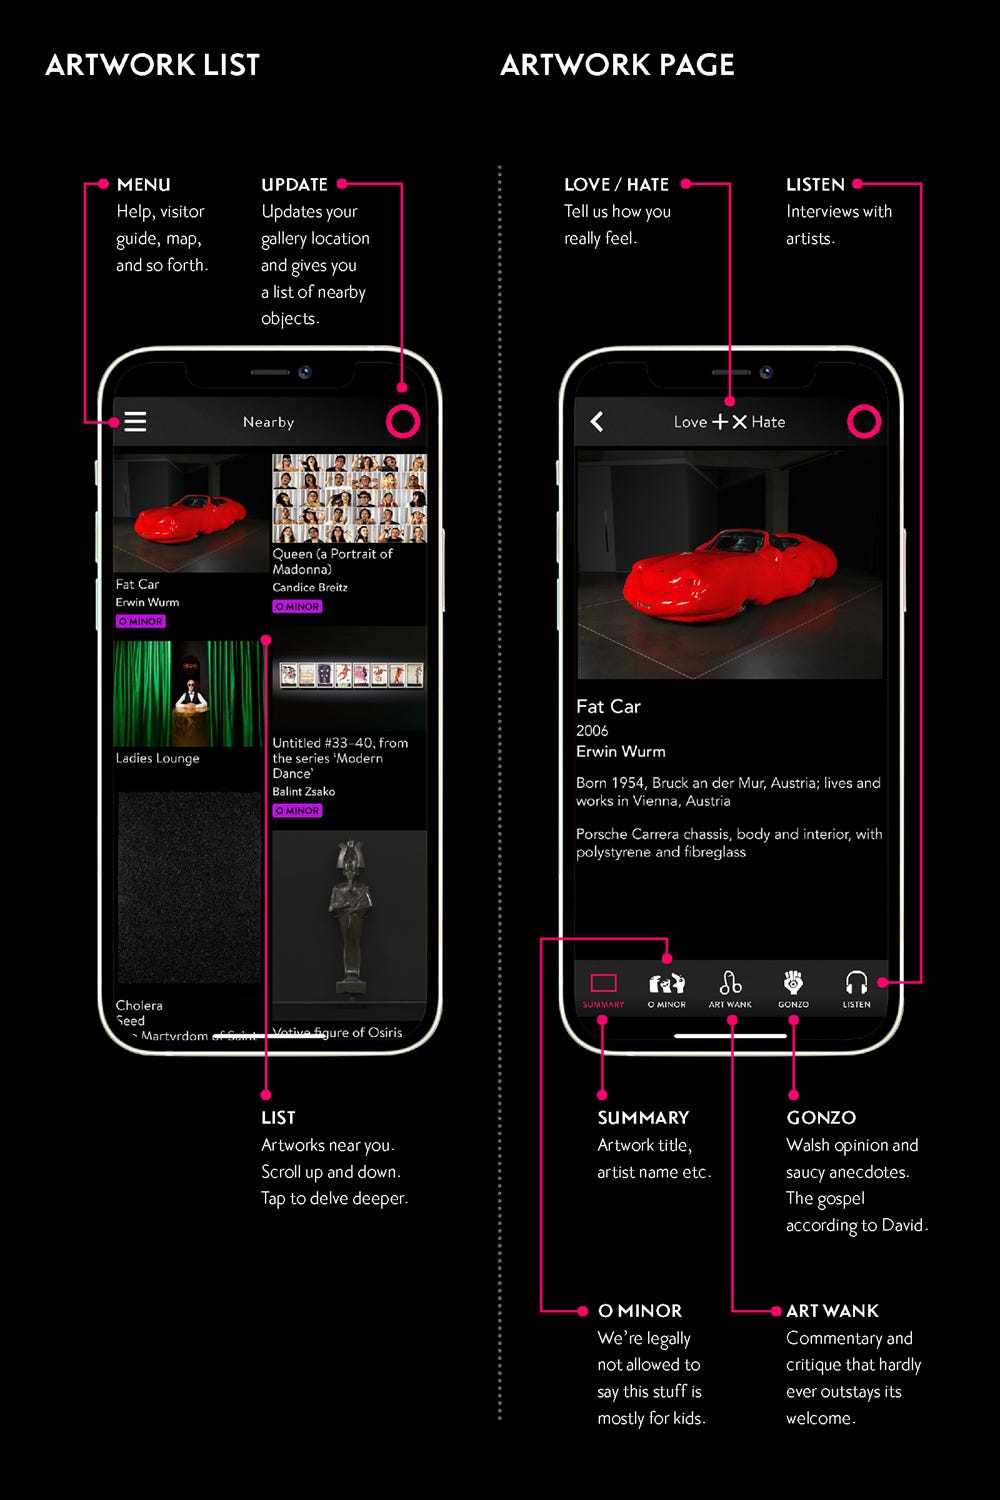 Two phones depicting The O app by MONA. On the left, Artwork list. Menu provides access to help, visitor guide, map, and so forth. The O button updates your gallery location and gives you a list of nearby objects. In the main screen, a masonry grid of artworks. On the right, the artwork titled "Fat Car", with the app functionality in highlights. Love/Hate to rate the artwork, Listen to interviews with artists, Hide works unsuitable for Minors, read David's commentary. Active page — summary of the artwork.